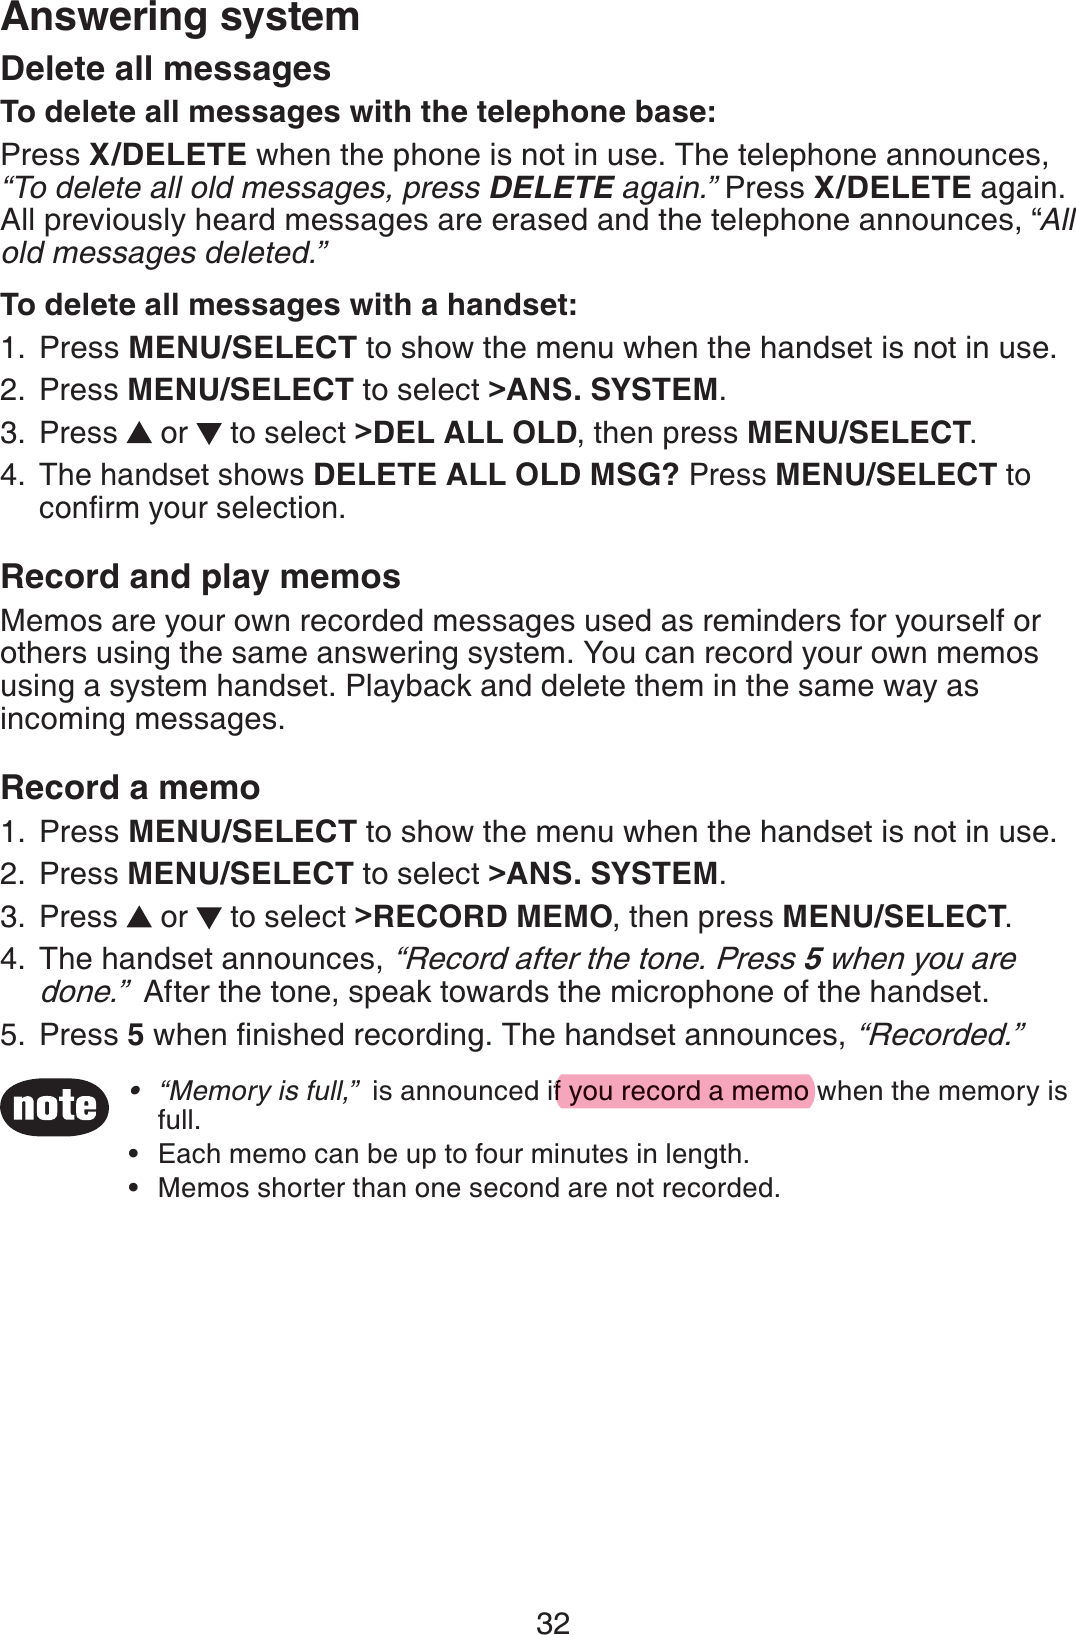 32Answering system“Memory is full,”  is announced if you record a memo when the memory is full.Each memo can be up to four minutes in length.Memos shorter than one second are not recorded.•••Delete all messagesTo delete all messages with the telephone base:Press X/DELETE when the phone is not in use. The telephone announces,  “To delete all old messages, press DELETE again.” Press X/DELETE again. All previously heard messages are erased and the telephone announces, “All old messages deleted.”To delete all messages with a handset:Press MENU/SELECT to show the menu when the handset is not in use.Press MENU/SELECT to select &gt;ANS. SYSTEM.Press   or   to select &gt;DEL ALL OLD, then press MENU/SELECT.The handset shows DELETE ALL OLD MSG? Press MENU/SELECT to conﬁrm your selection.Record and play memosMemos are your own recorded messages used as reminders for yourself or others using the same answering system. You can record your own memos using a system handset. Playback and delete them in the same way as incoming messages.Record a memoPress MENU/SELECT to show the menu when the handset is not in use.Press MENU/SELECT to select &gt;ANS. SYSTEM.Press   or   to select &gt;RECORD MEMO, then press MENU/SELECT.The handset announces, “Record after the tone. Press 5 when you are done.”  After the tone, speak towards the microphone of the handset.Press 5 when ﬁnished recording. The handset announces, “Recorded.”1.2.3.4.1.2.3.4.5.f you record a memo